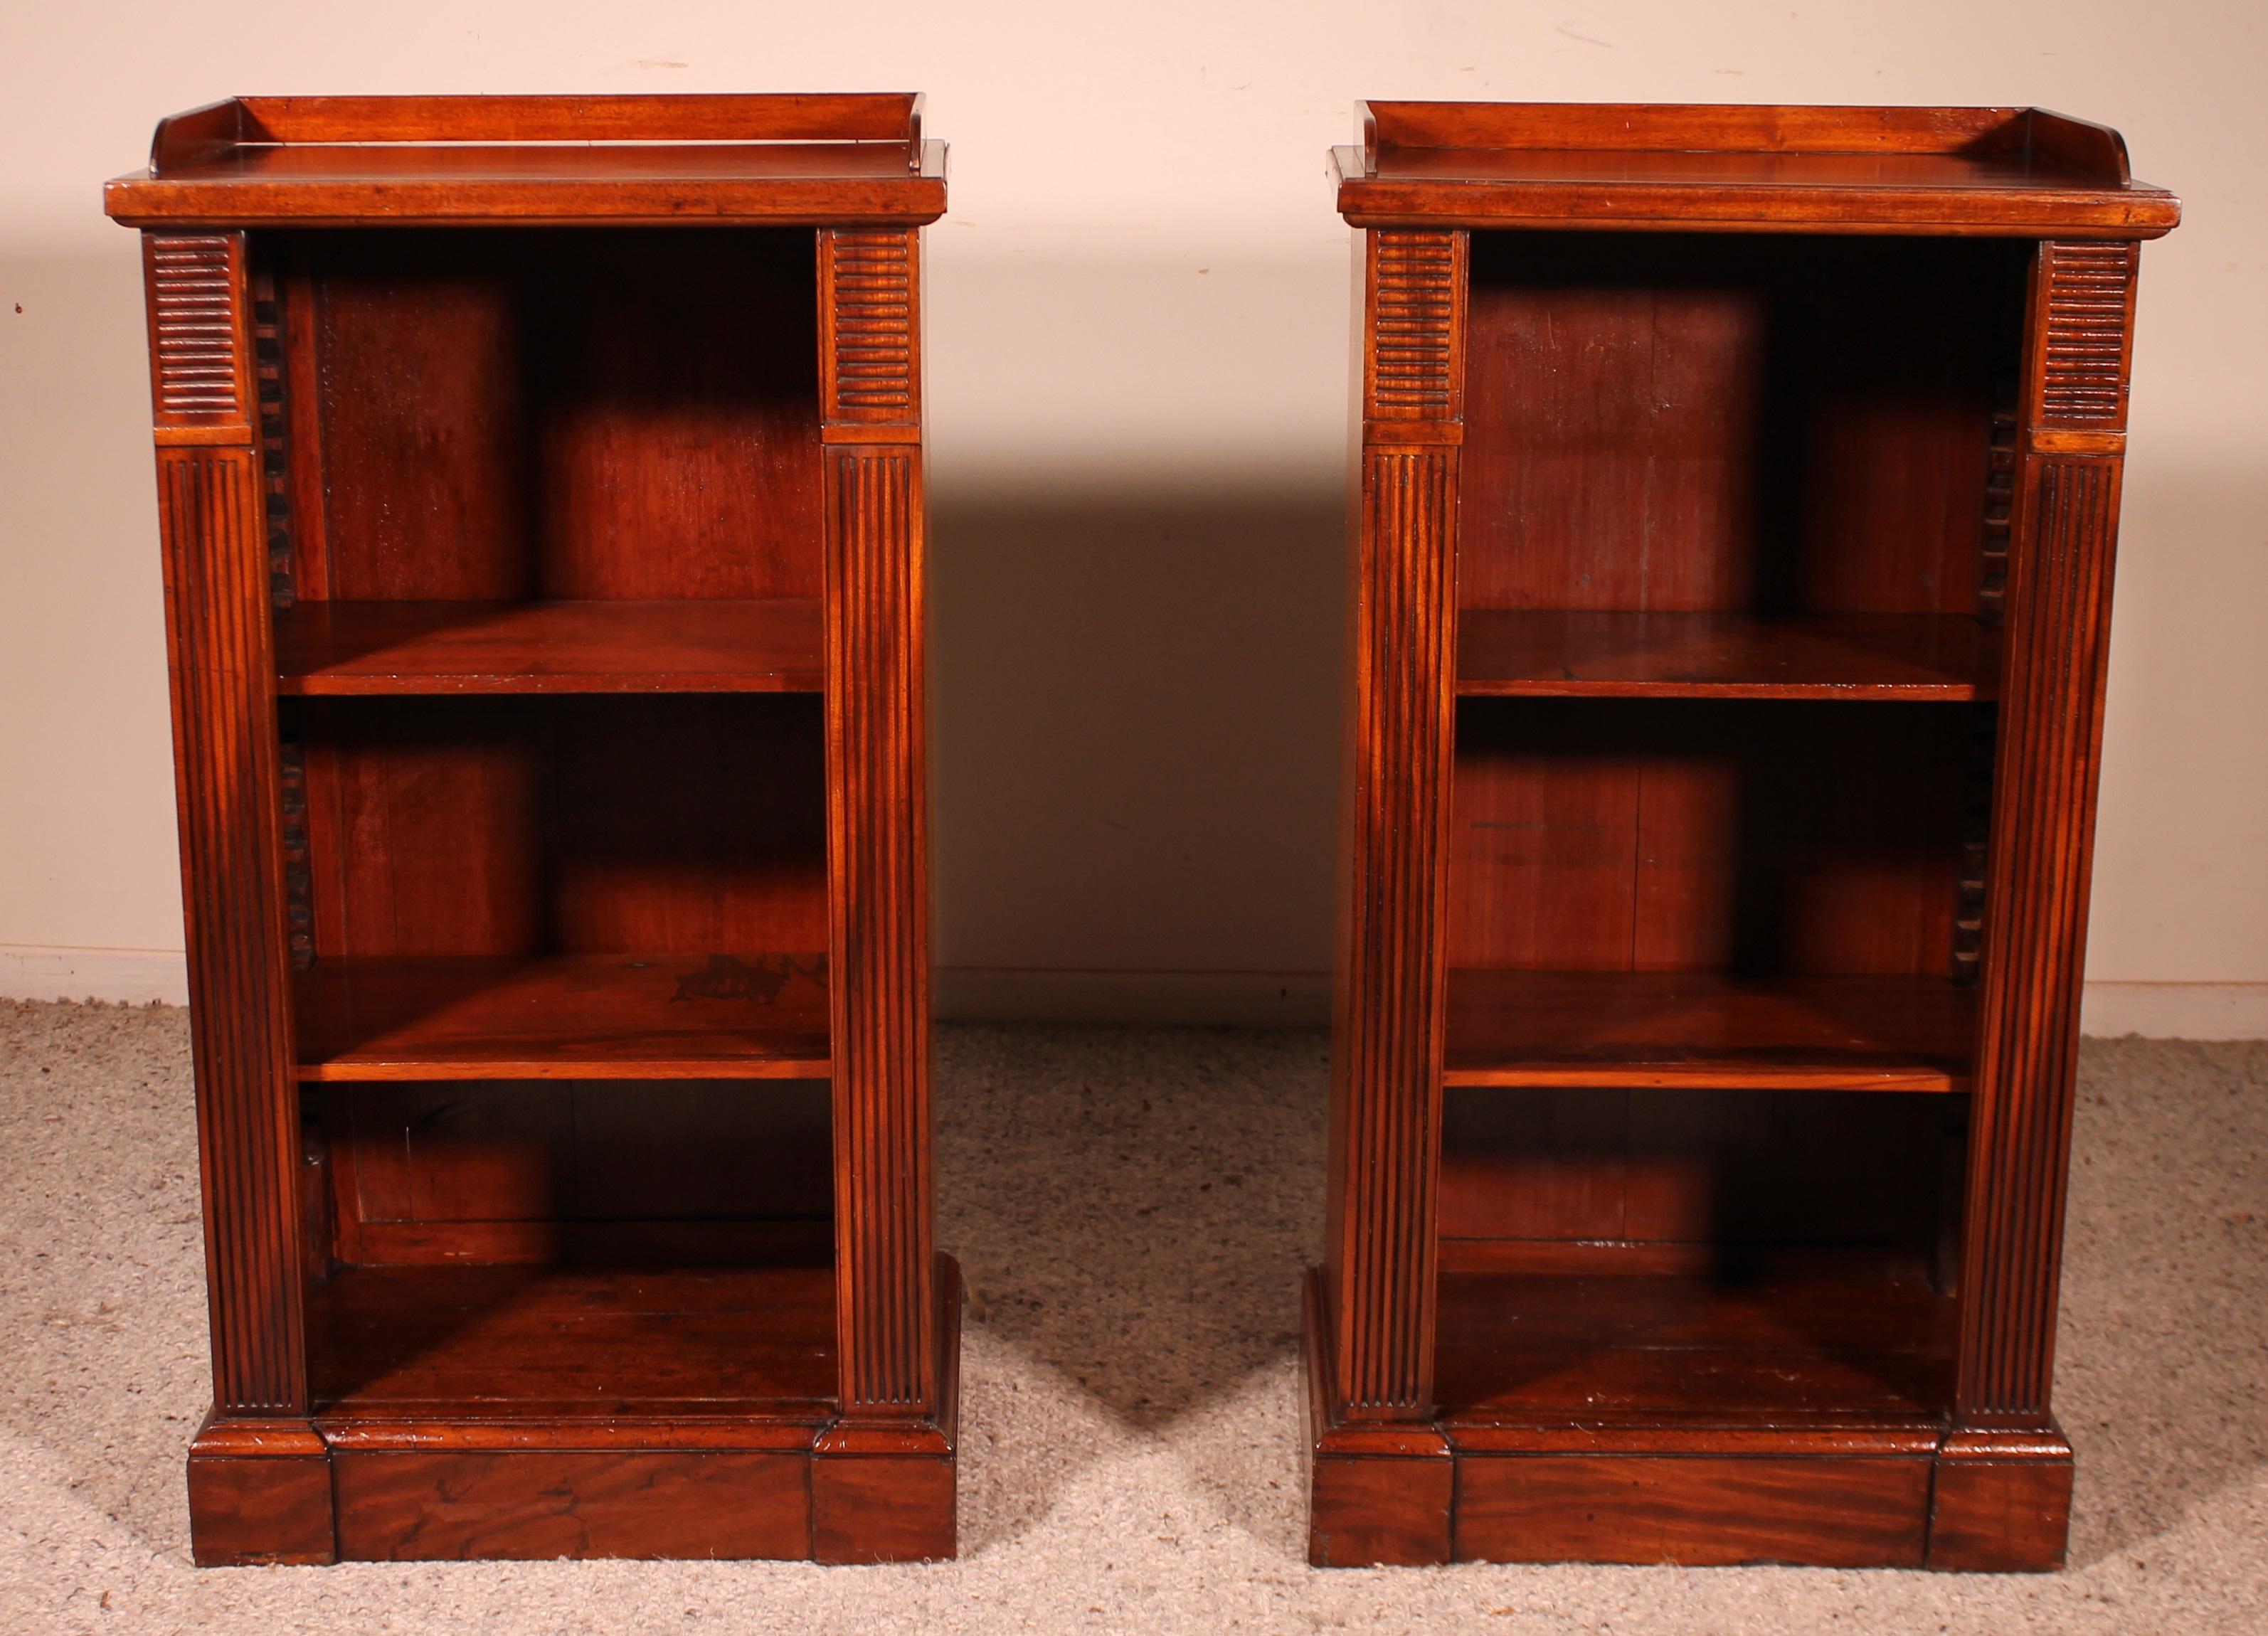 Elegant pair of small 19th century English open bookcases in mahogany
very good quality pair of period and William IV style from the early 19th century
It is unusual to find a pair of bookcases in these dimensions. Small model

The bookcases are